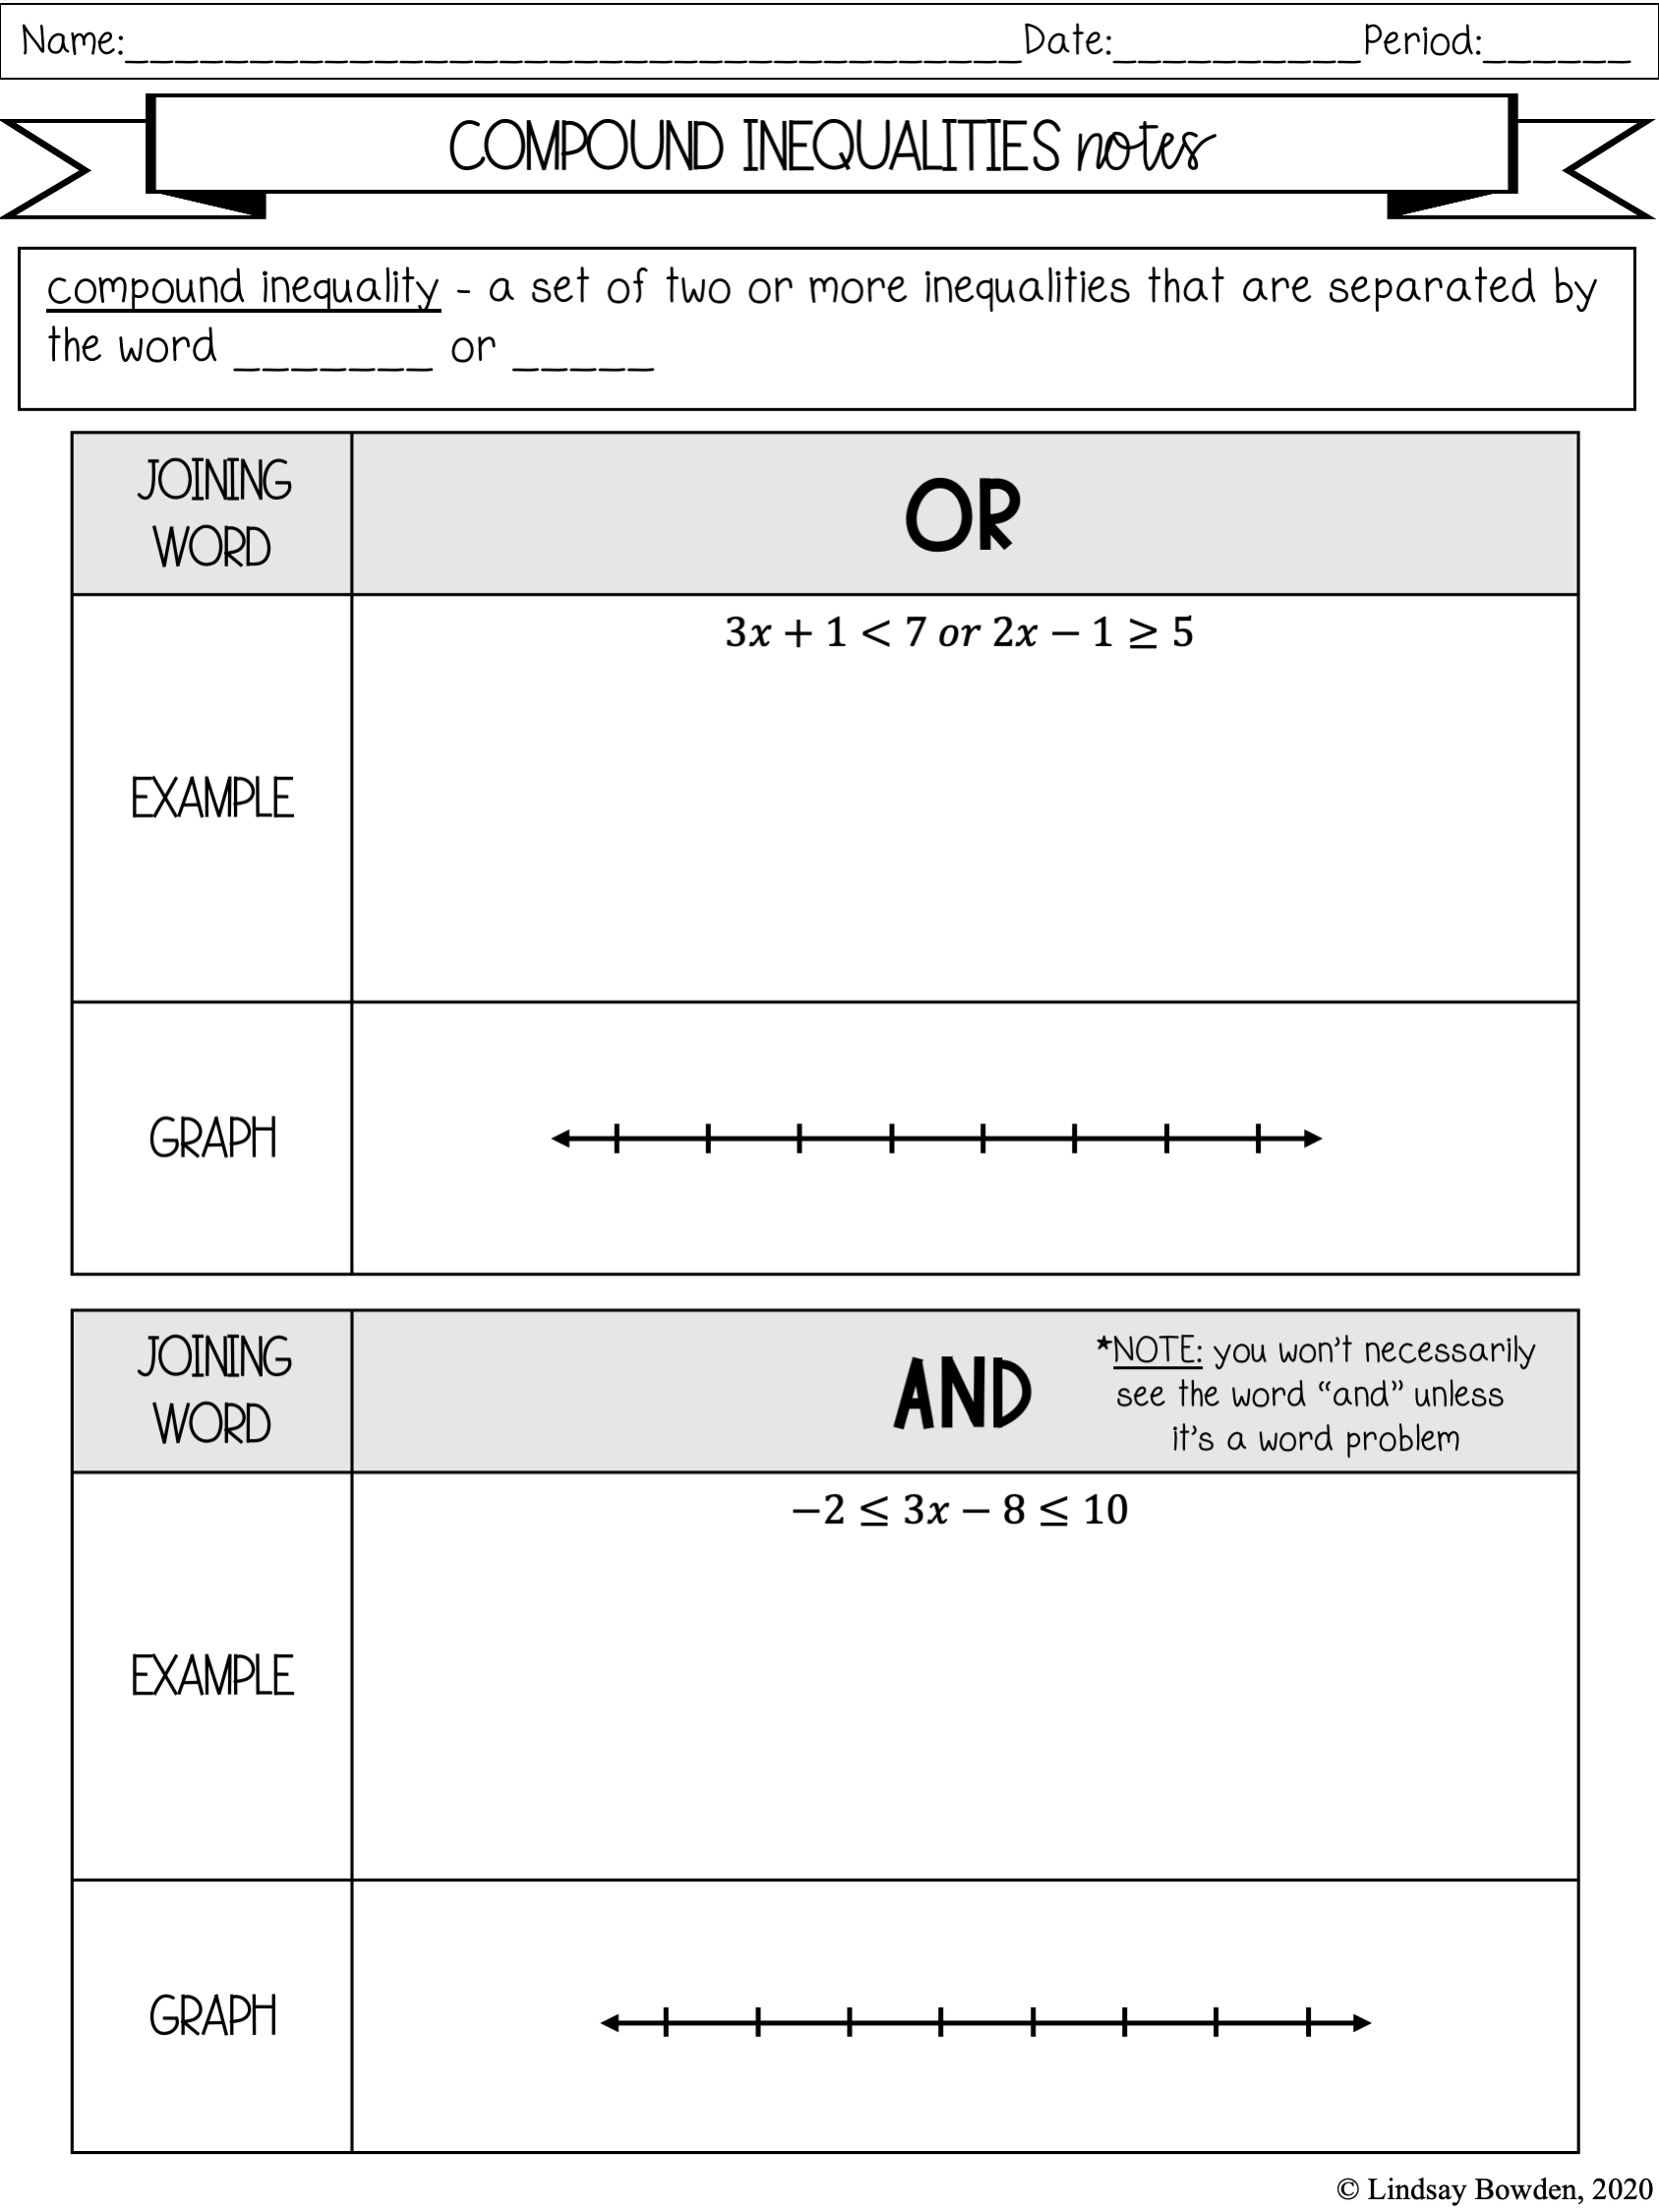 Compound Inequalities Notes and Worksheets - Lindsay Bowden Pertaining To Solving Compound Inequalities Worksheet